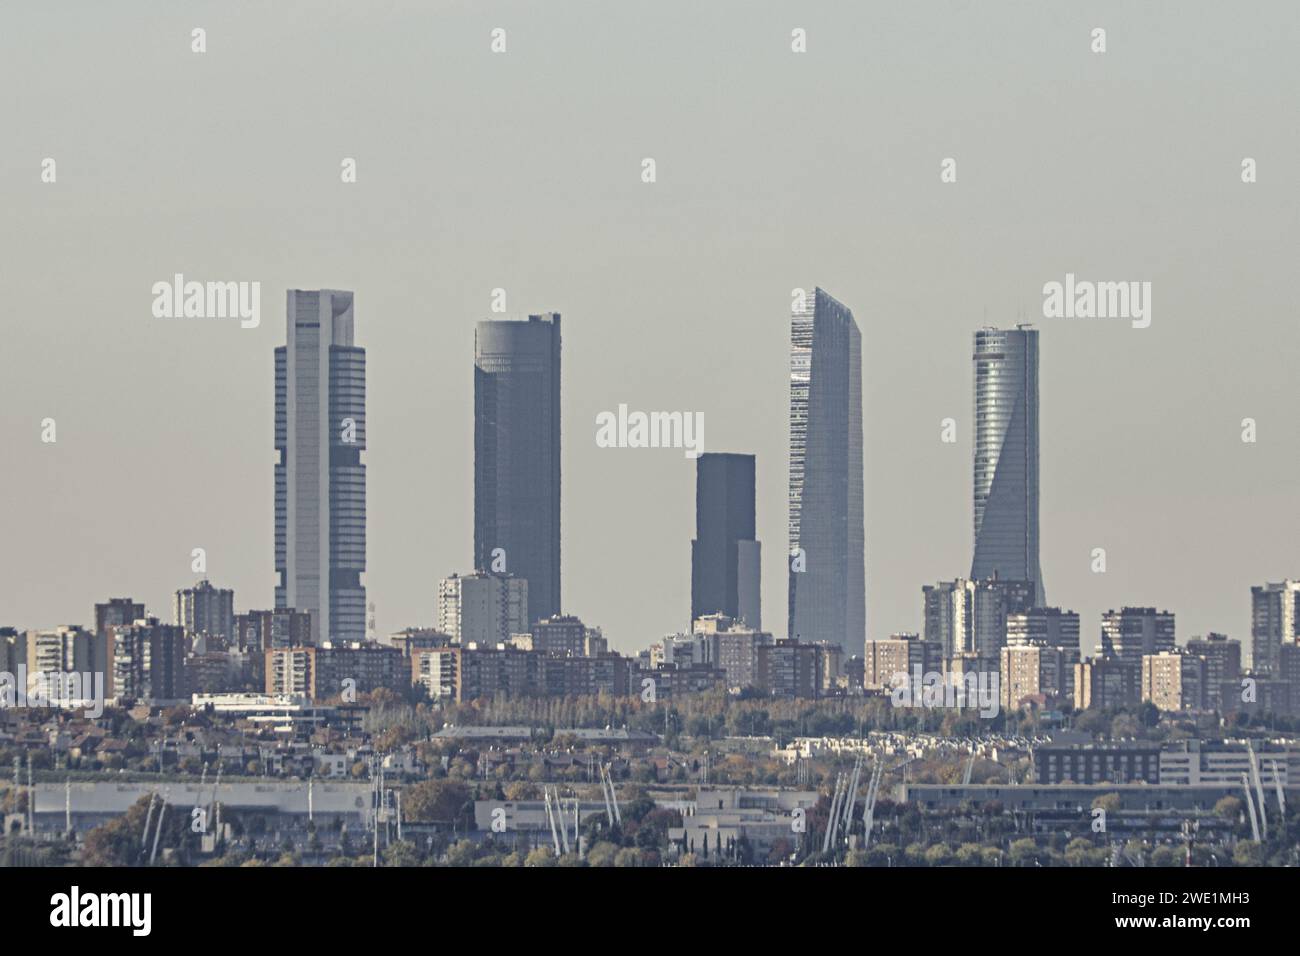 Skyline of the city of Madrid with the five tallest towers Stock Photo